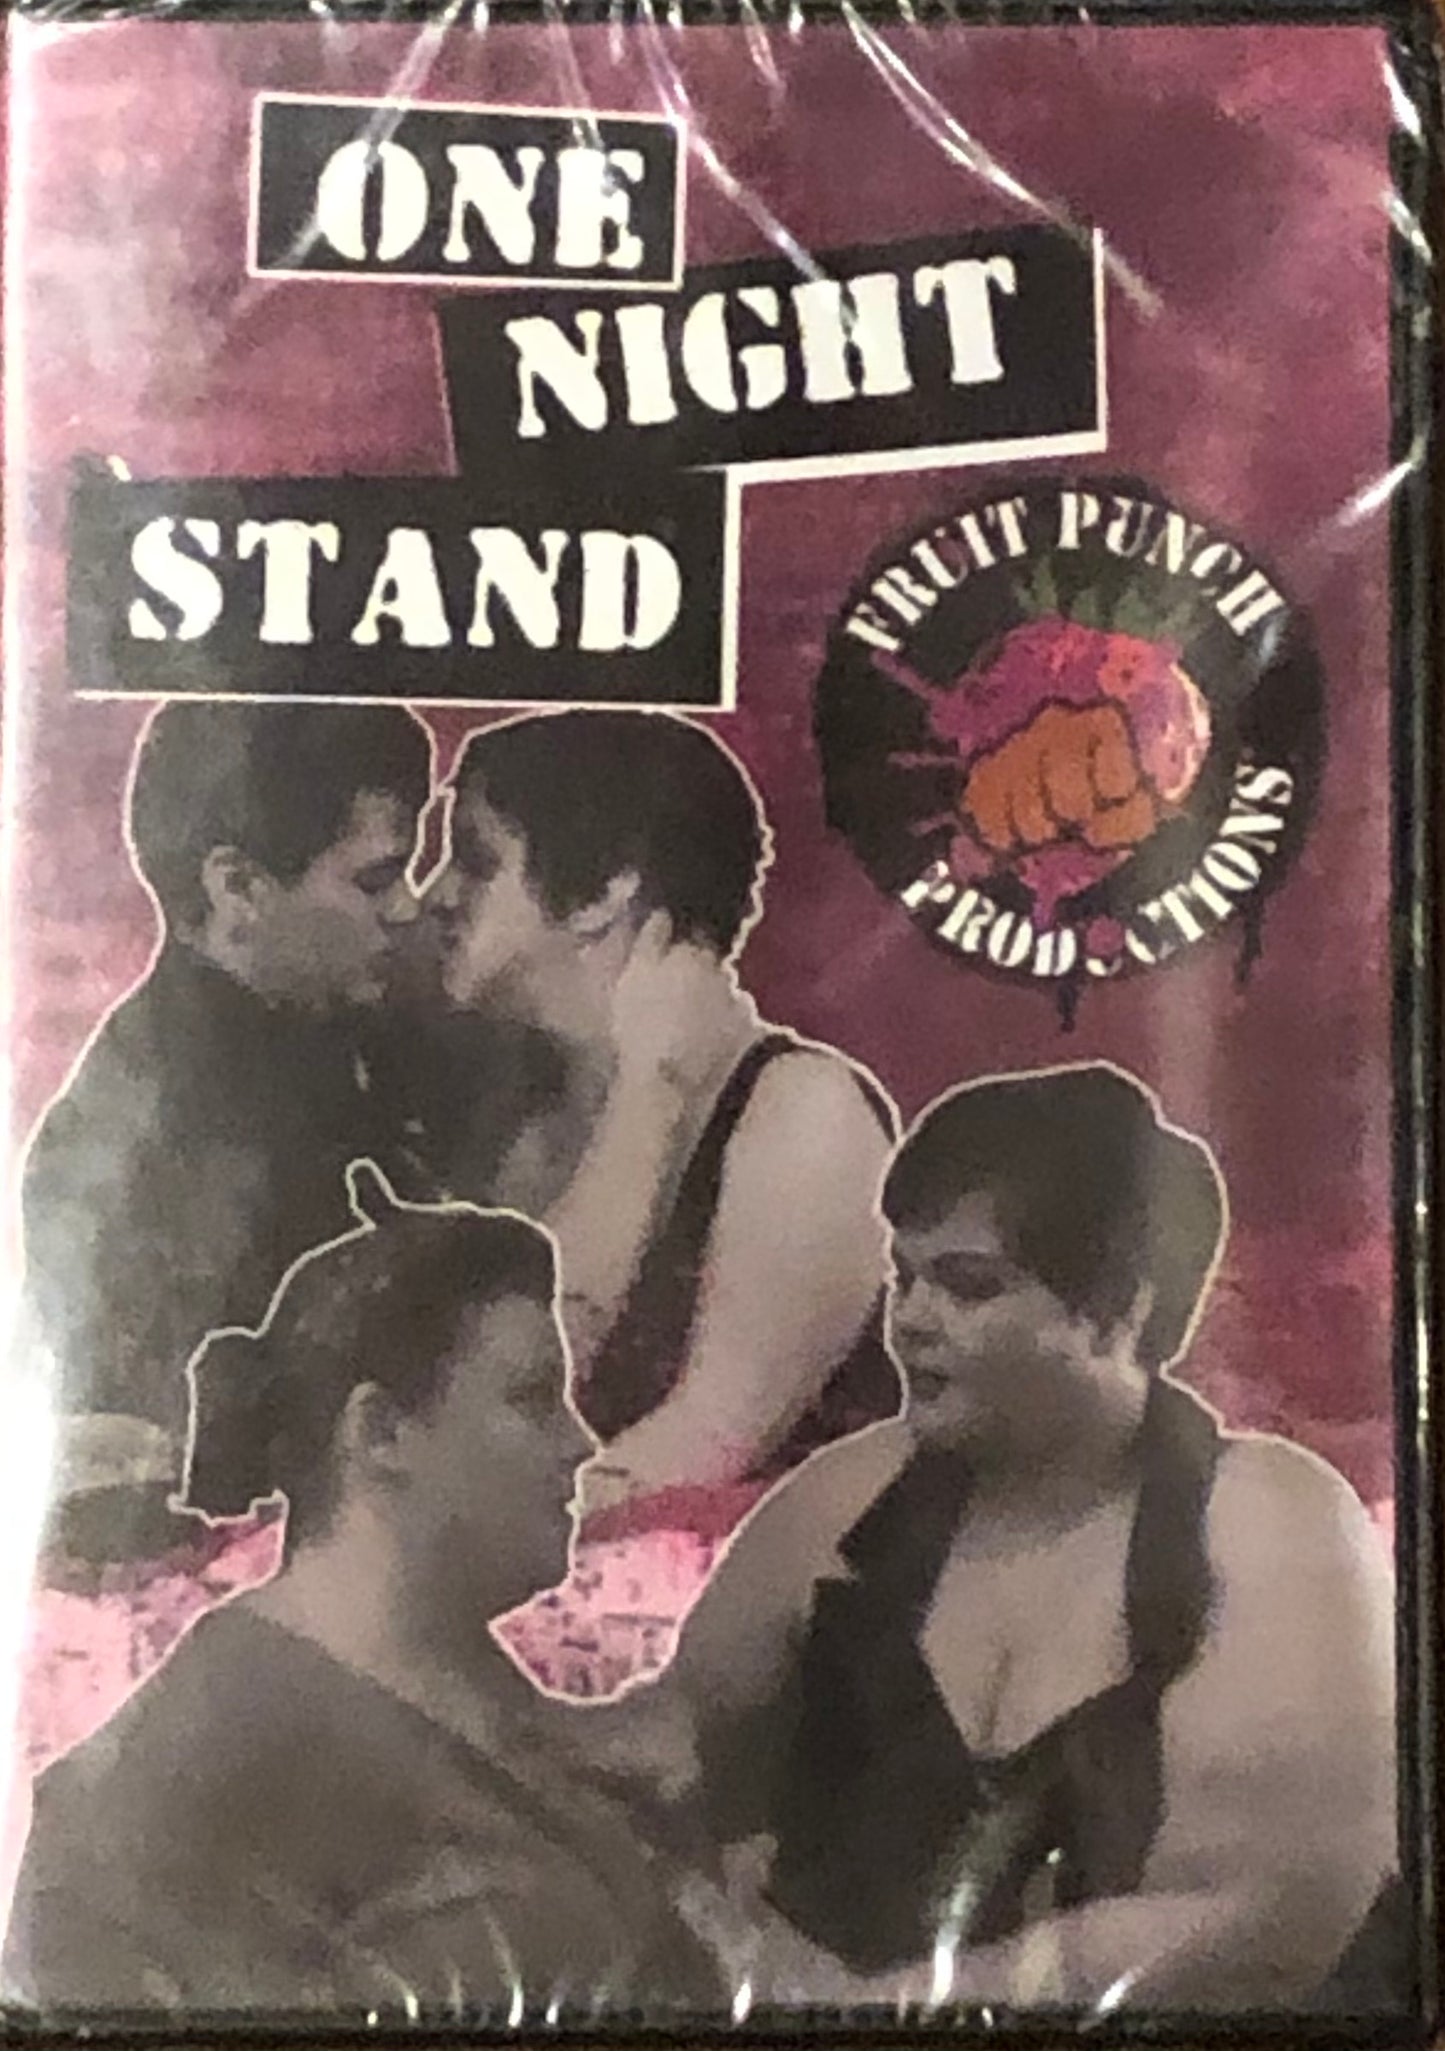 One Night Stand DVD - Fruit Punch Productions